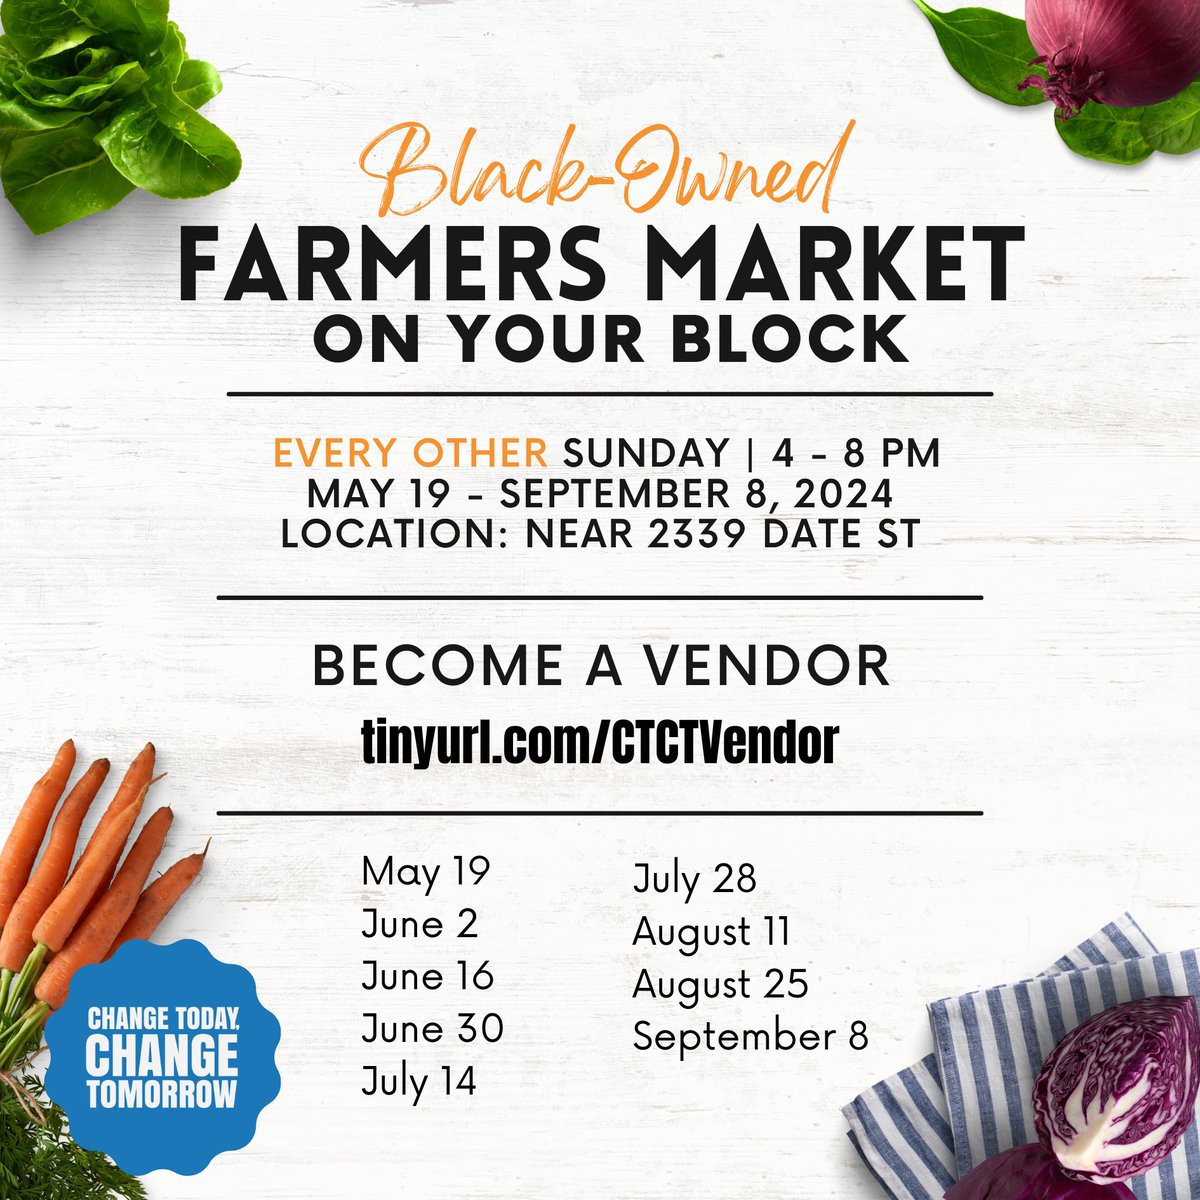 Support your local Black-owned Farmers Market every other Sunday from May 19th to September 8th 4-8pm near 2339 Date St. Become a vendor at tinyurl.com/CTCTVendor